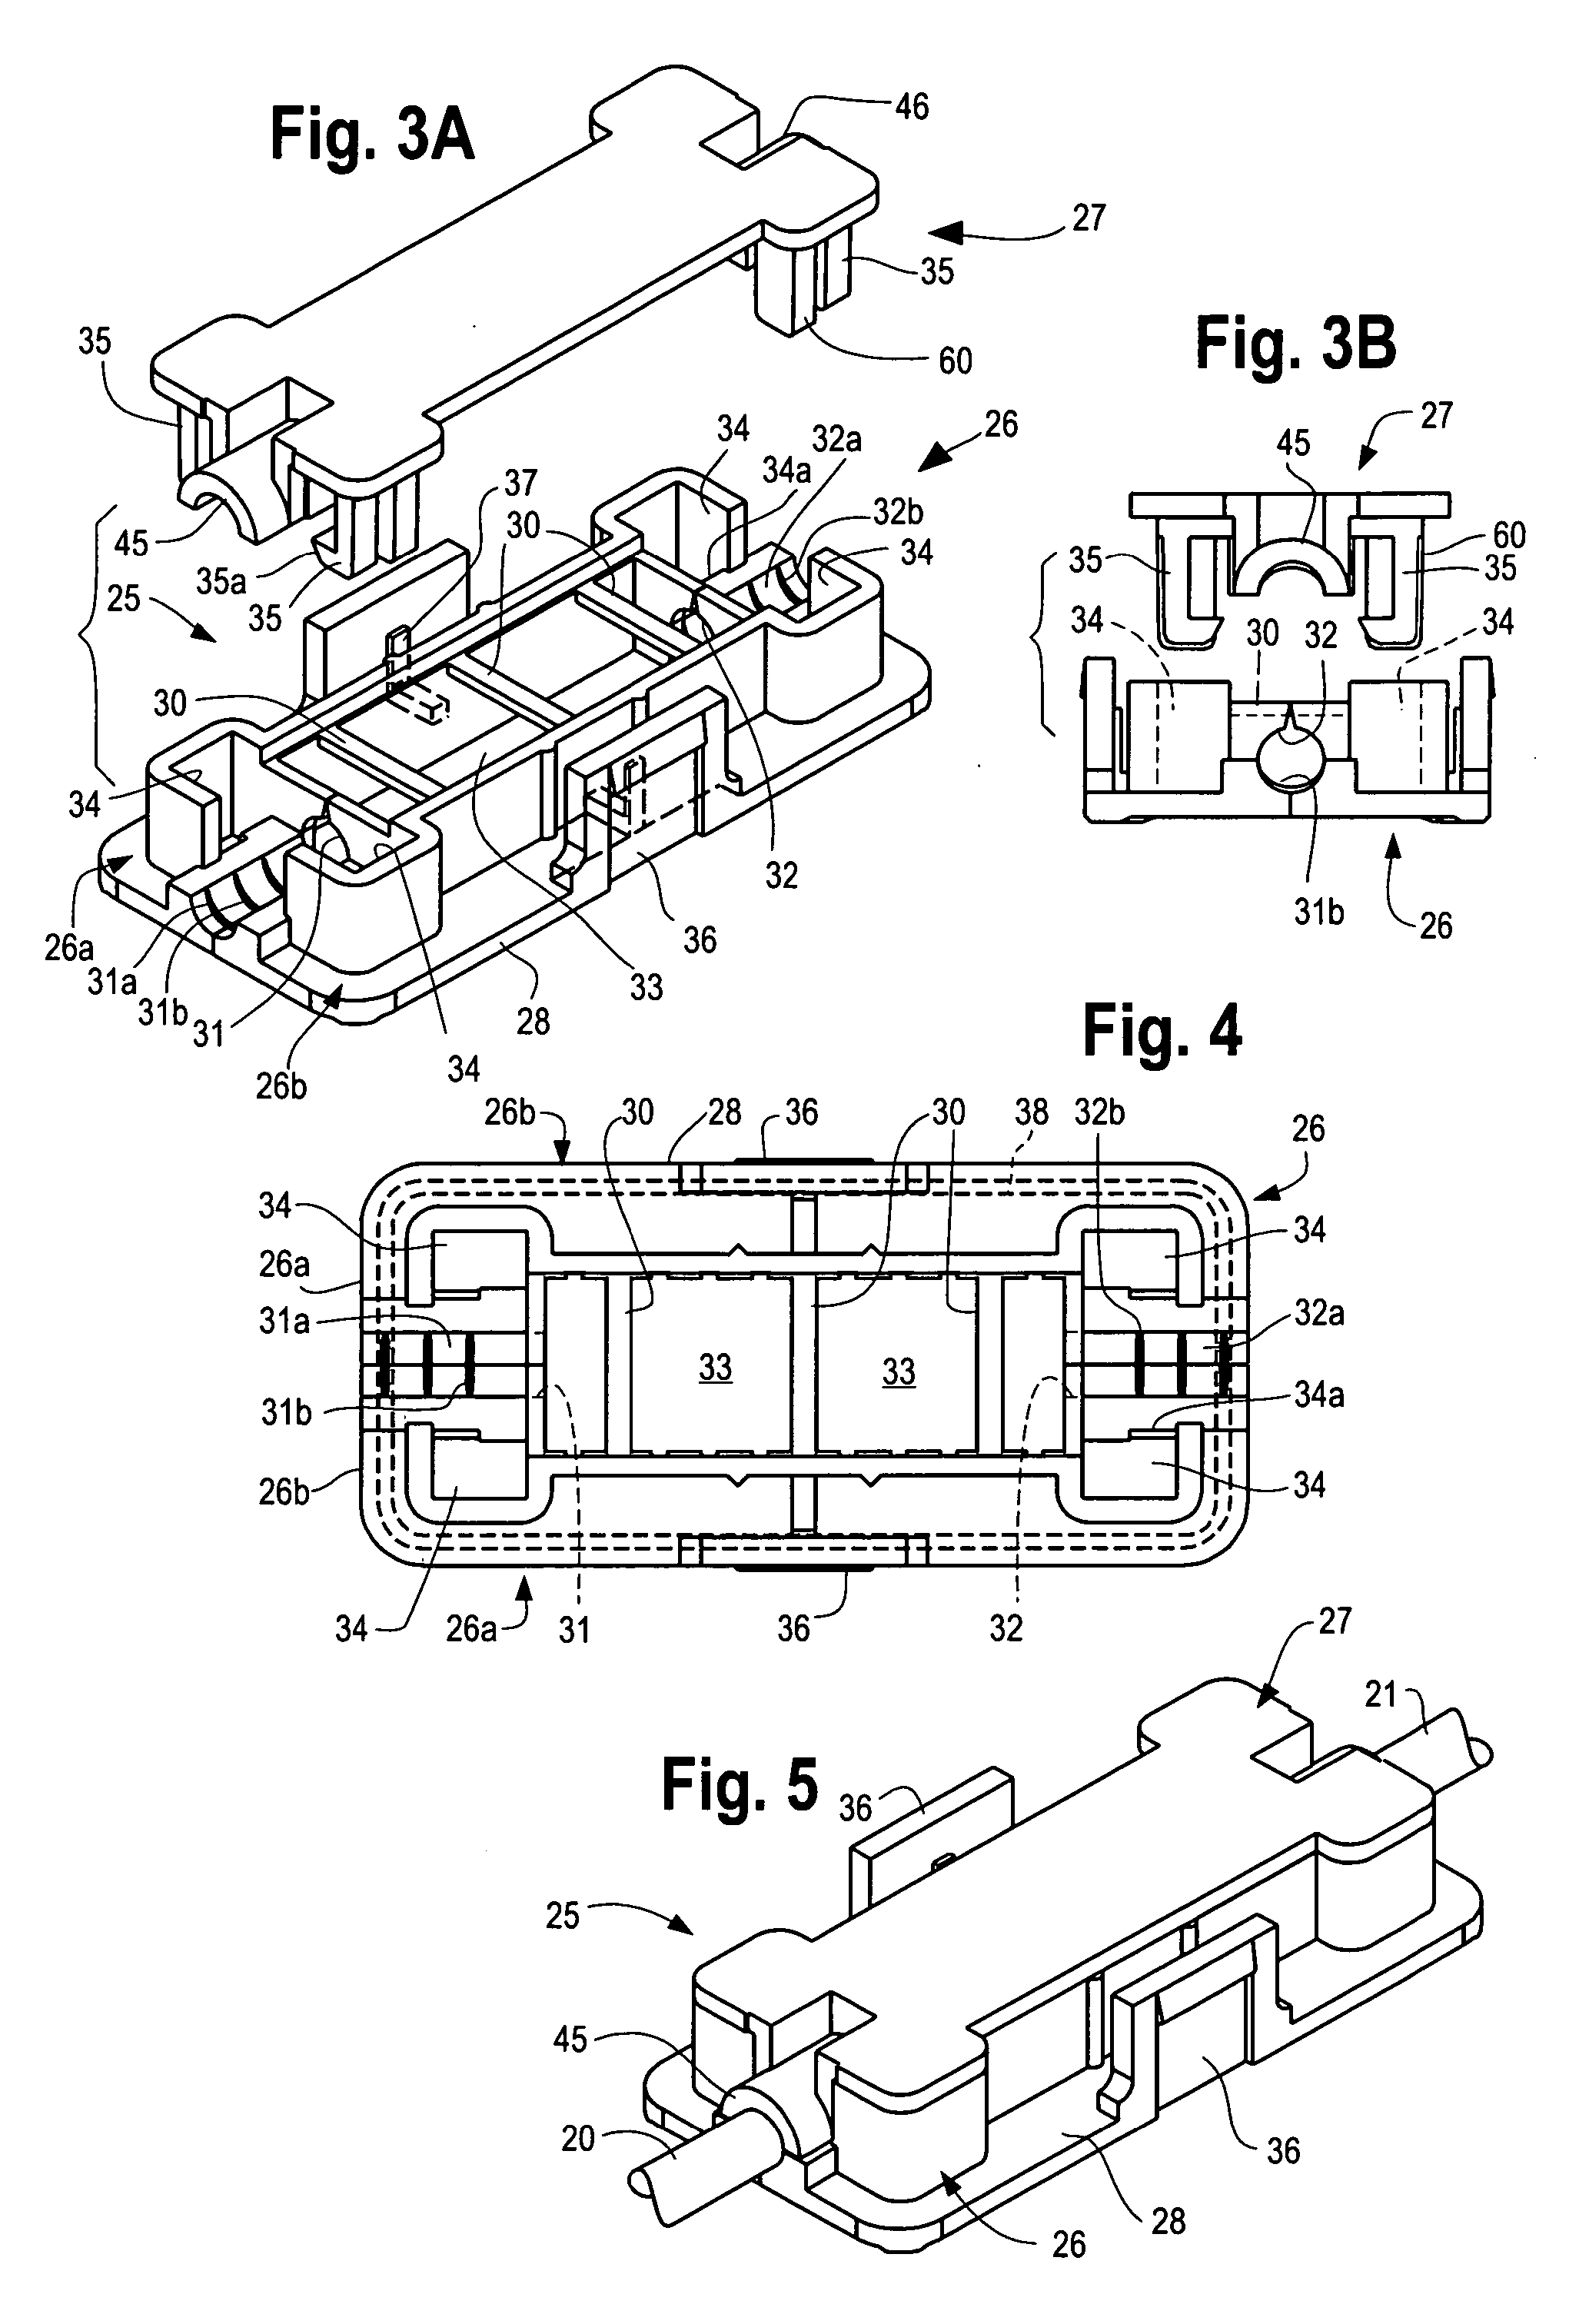 Junction box for output wiring from solar module and method of installing same